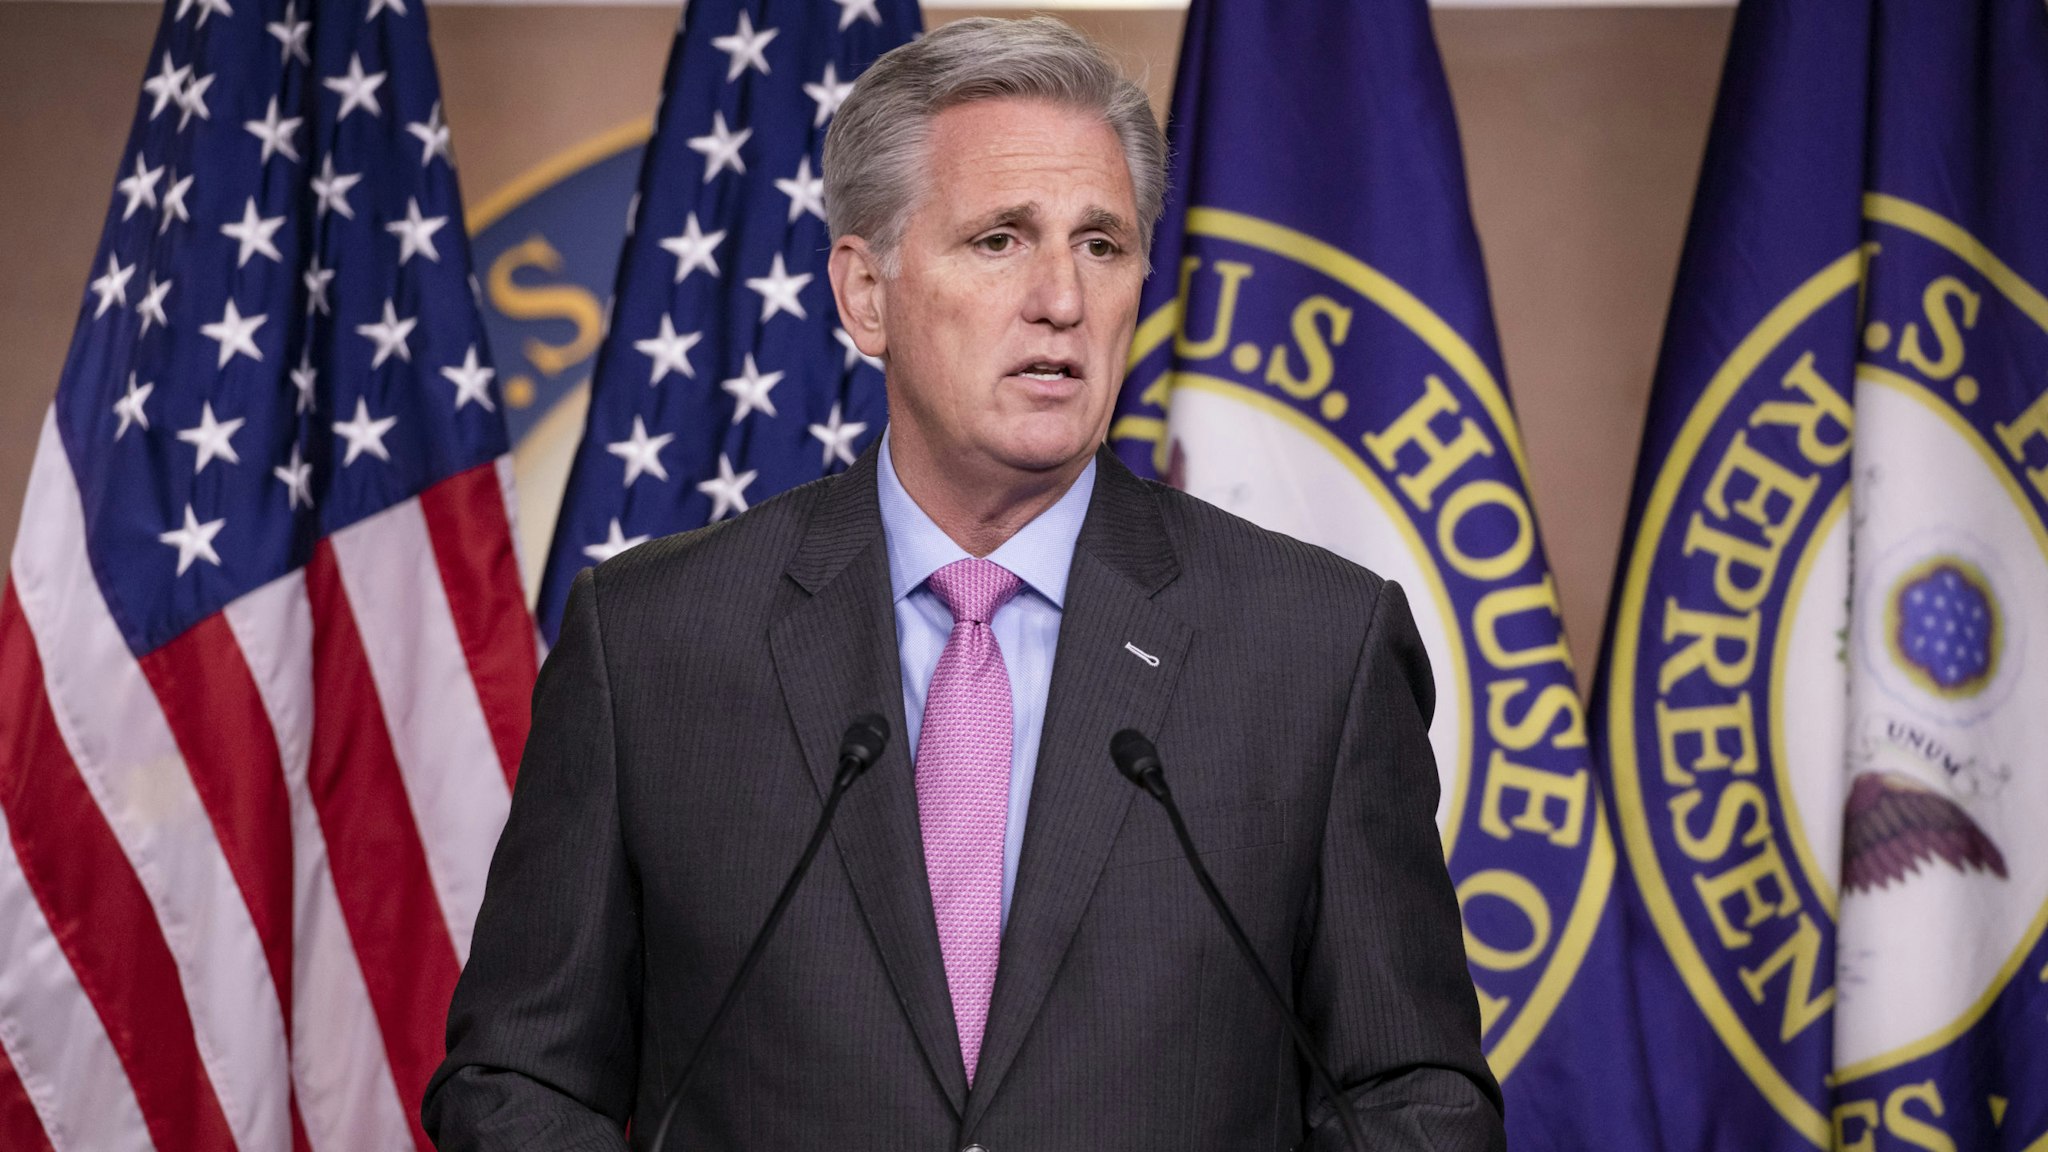 WASHINGTON, DC - MARCH 05: House Minority Leader Kevin McCarthy (R-CA) holds his weekly press conference on Capitol Hill on March 5, 2020 in Washington, DC.